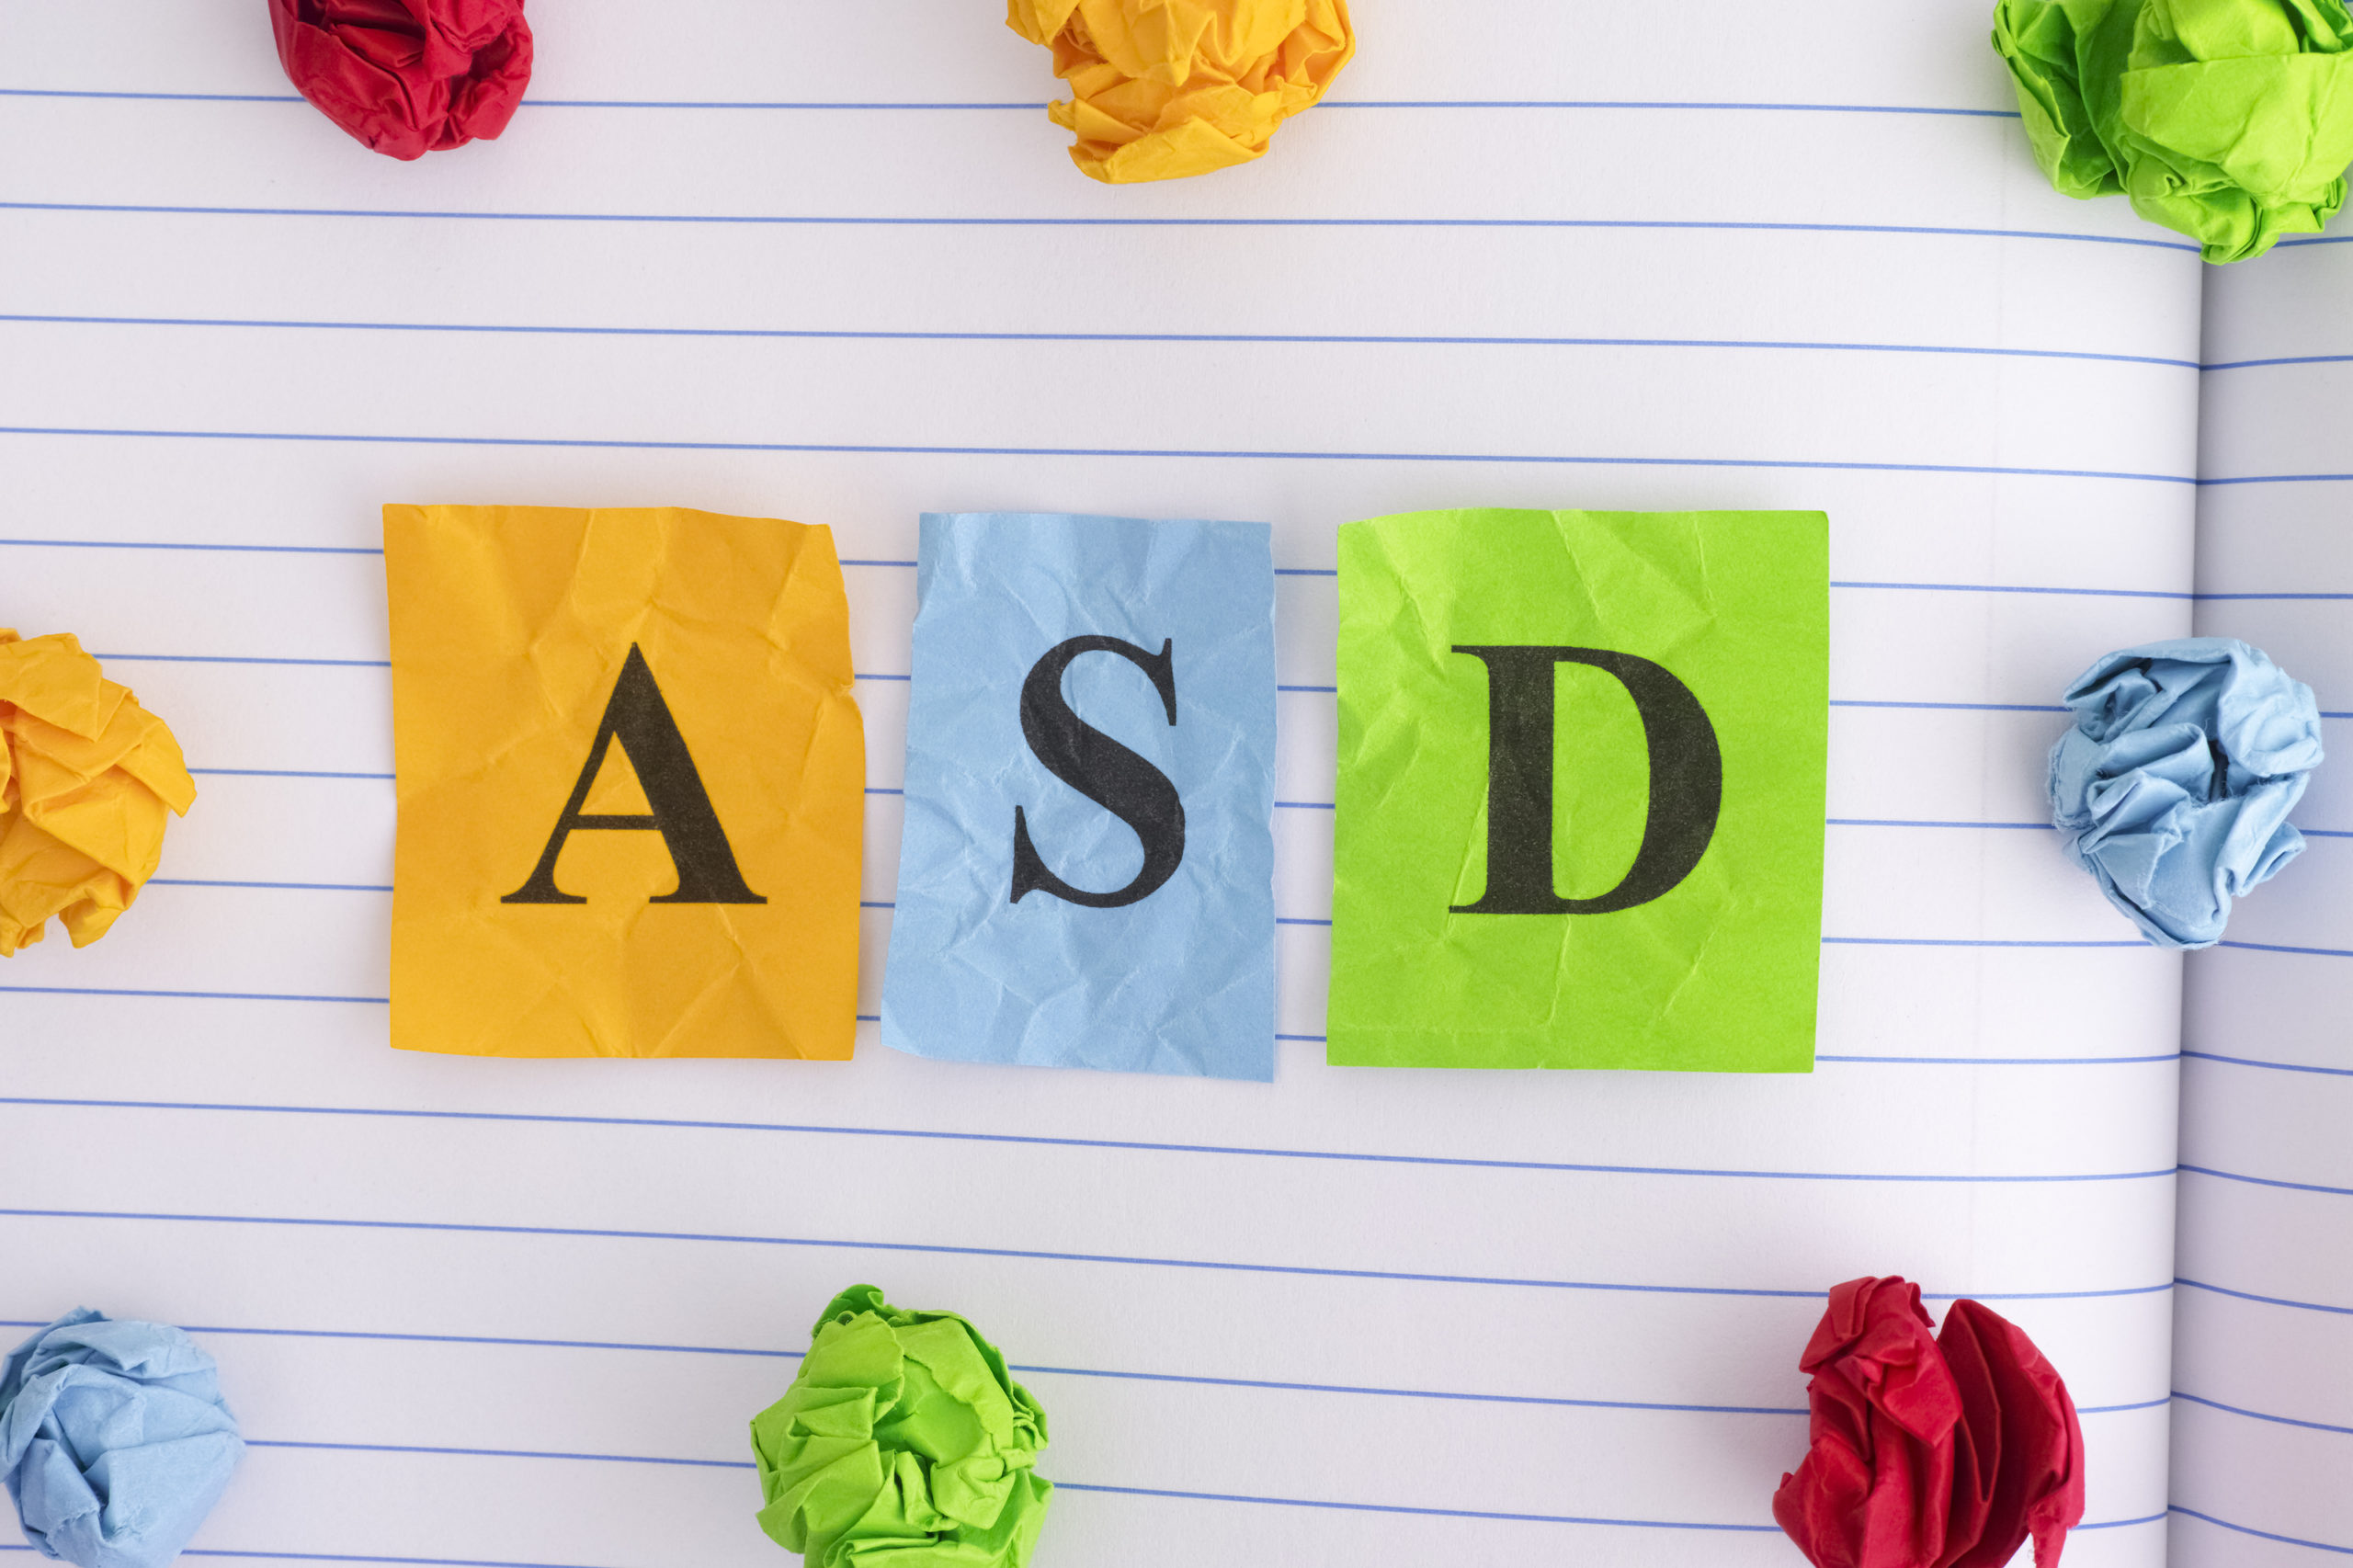 ASD. ASD (Autism spectrum disorder) on notebook sheet with some colorful crumpled paper balls around it. Close up.